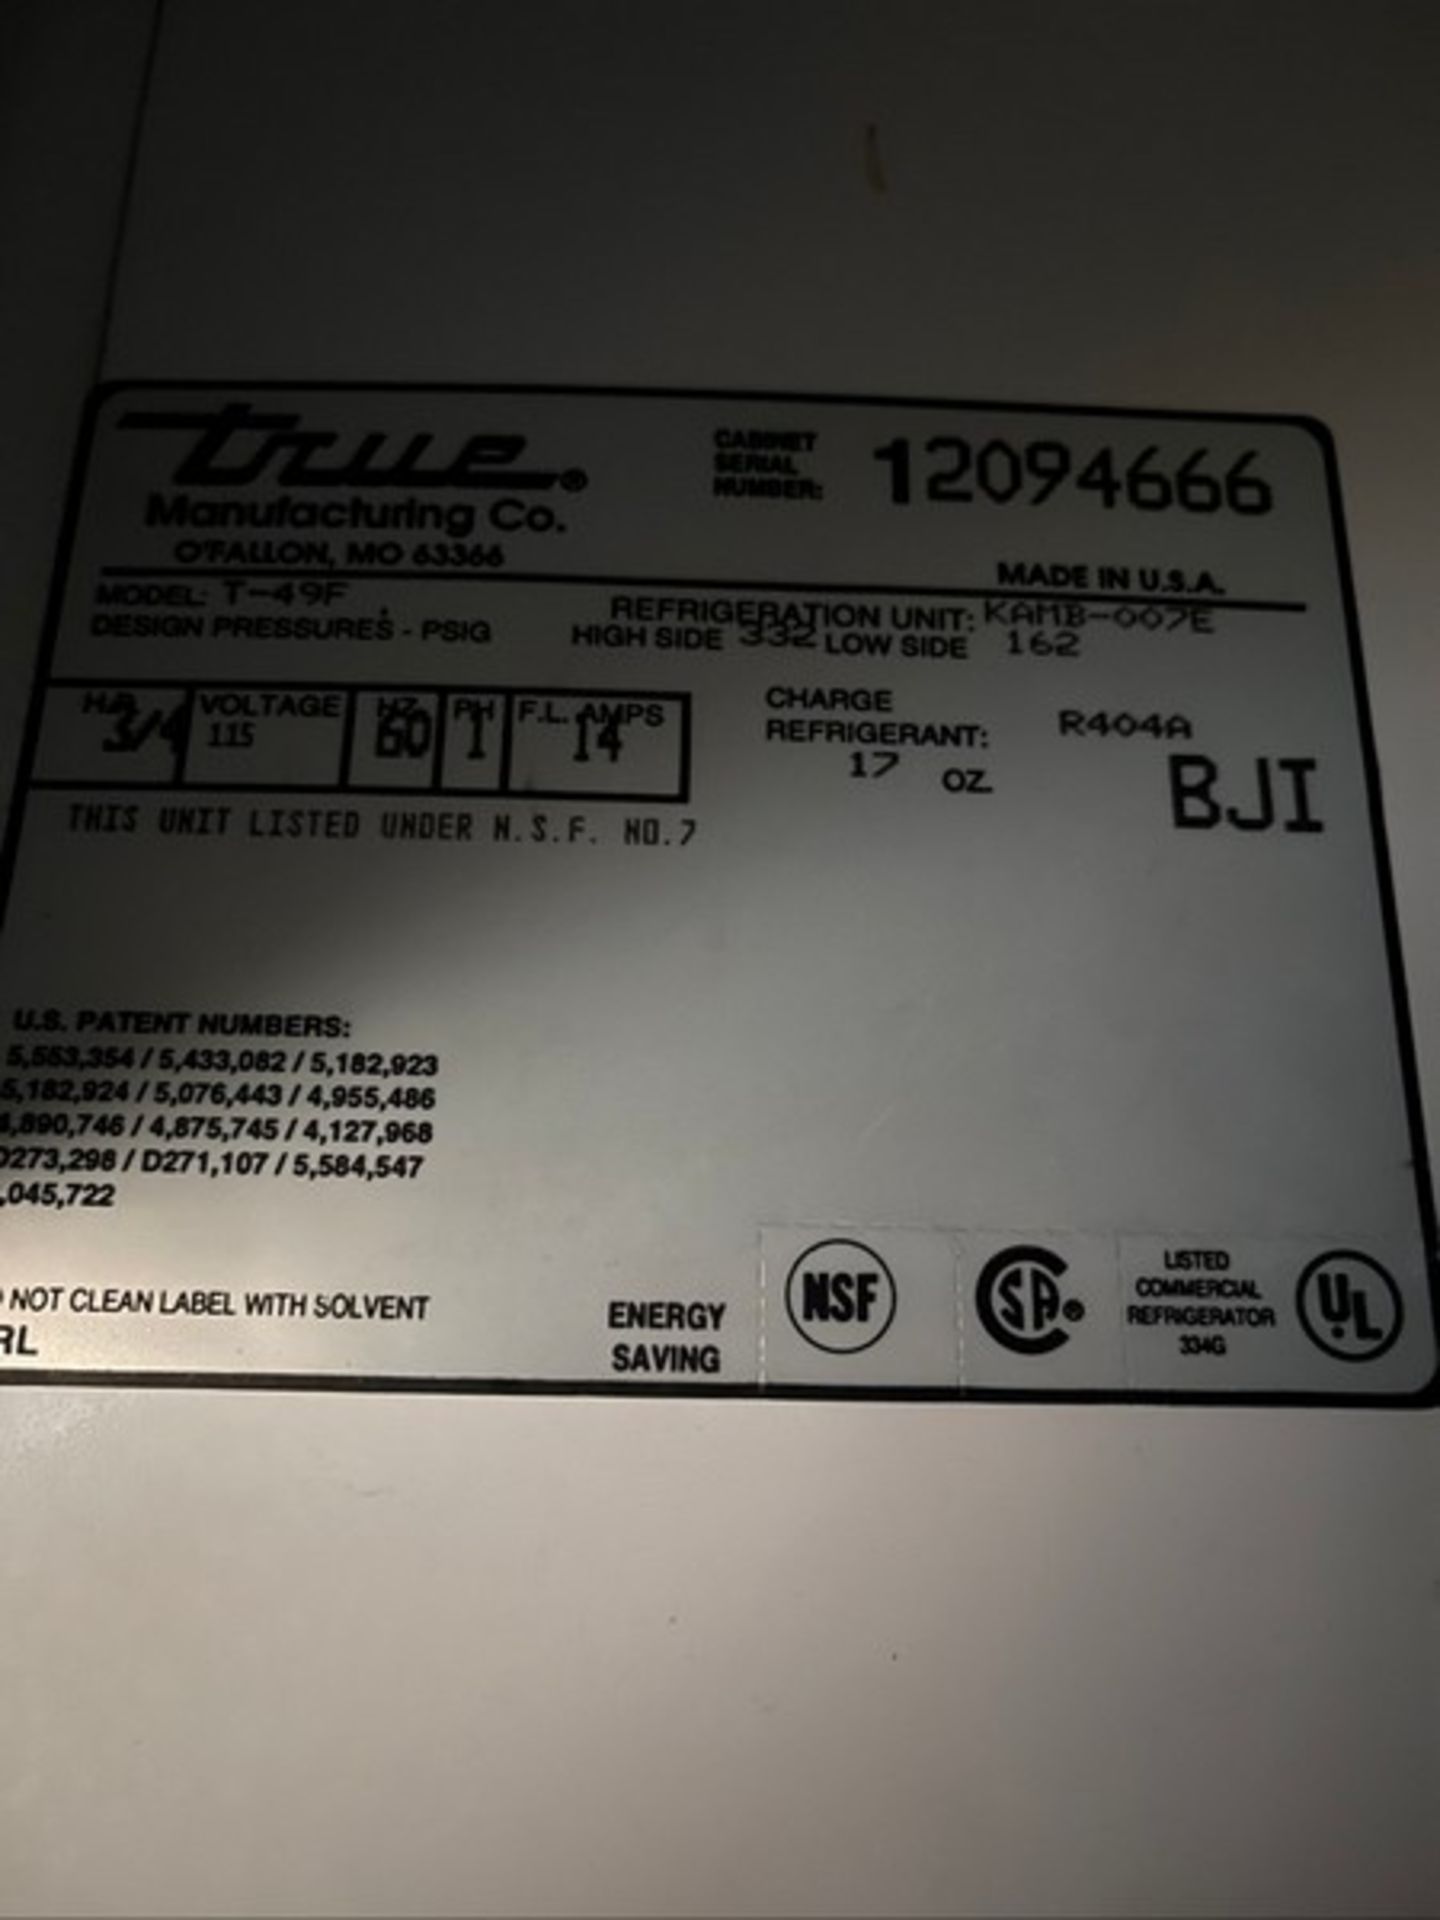 TRUE MANUFACTURING 2-DOOR S/S FREEZER, MODEL T-49F, S/N 12094666, 115 V, 1 PHASE(INV#80362)( - Image 2 of 3